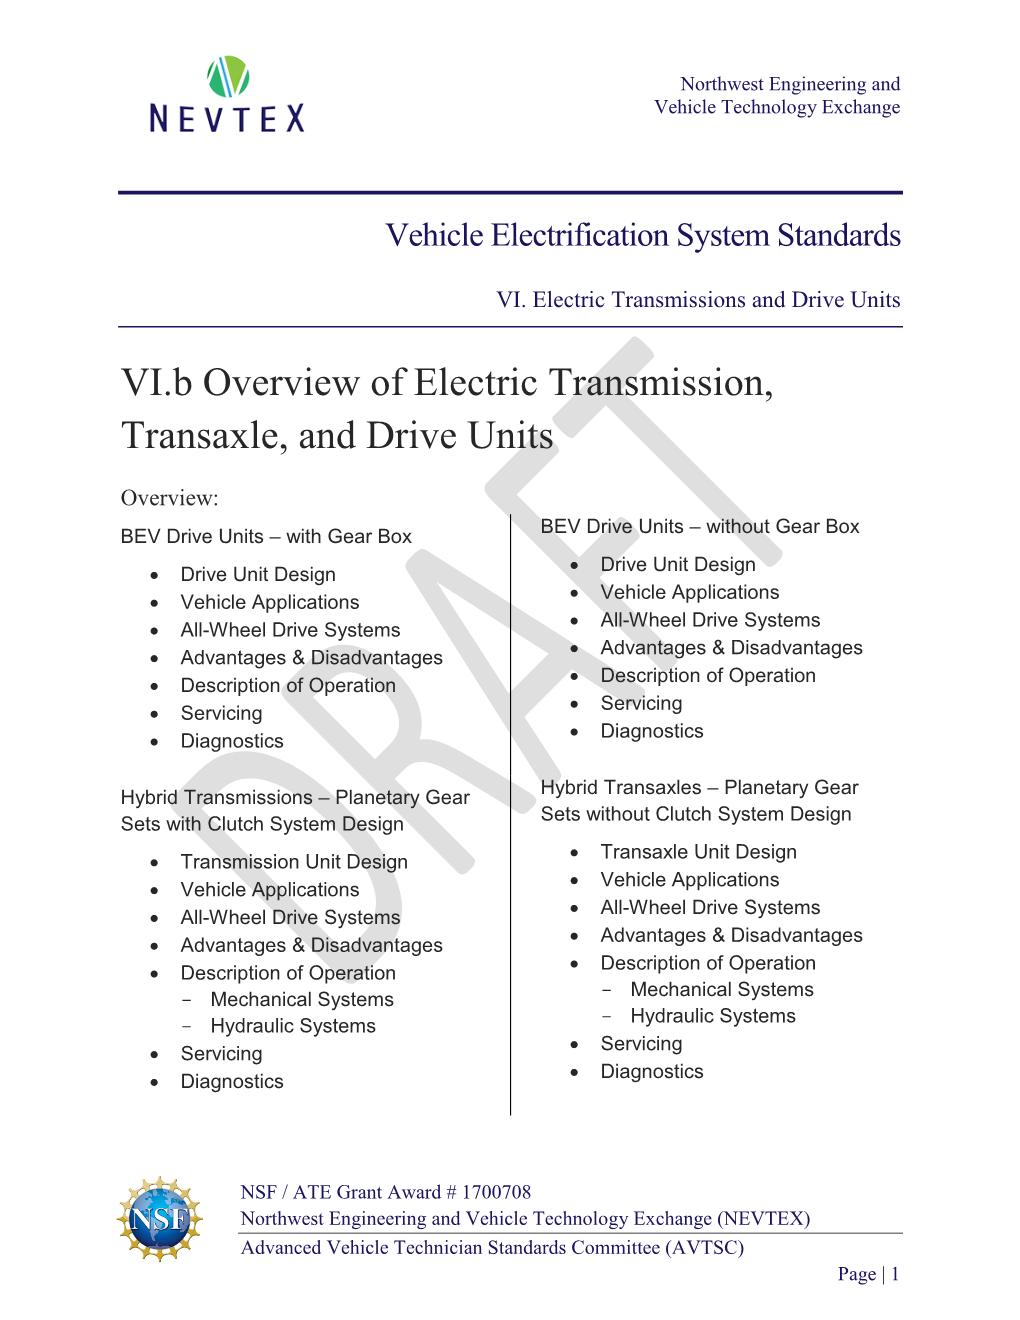 VI.B Overview of Electric Transmission, Transaxle, and Drive Units